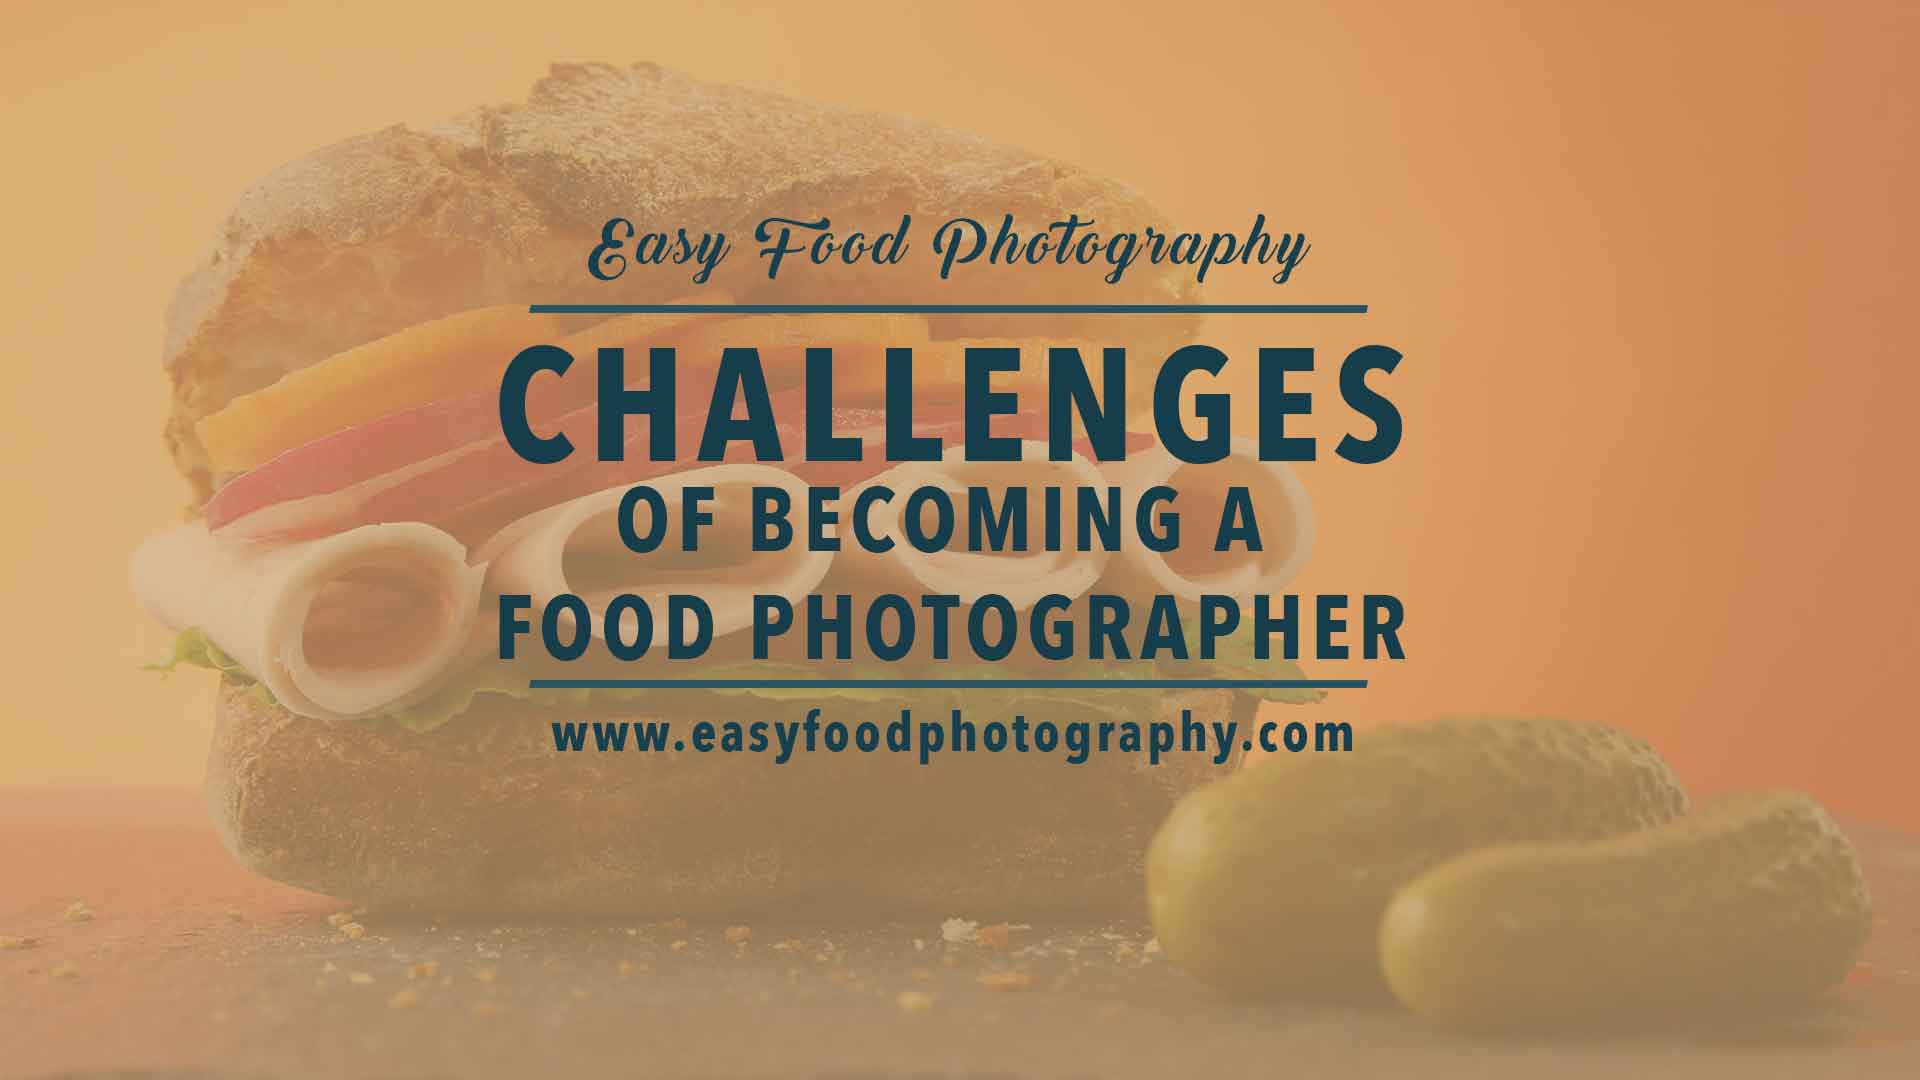 The challenges of becoming a food photographer